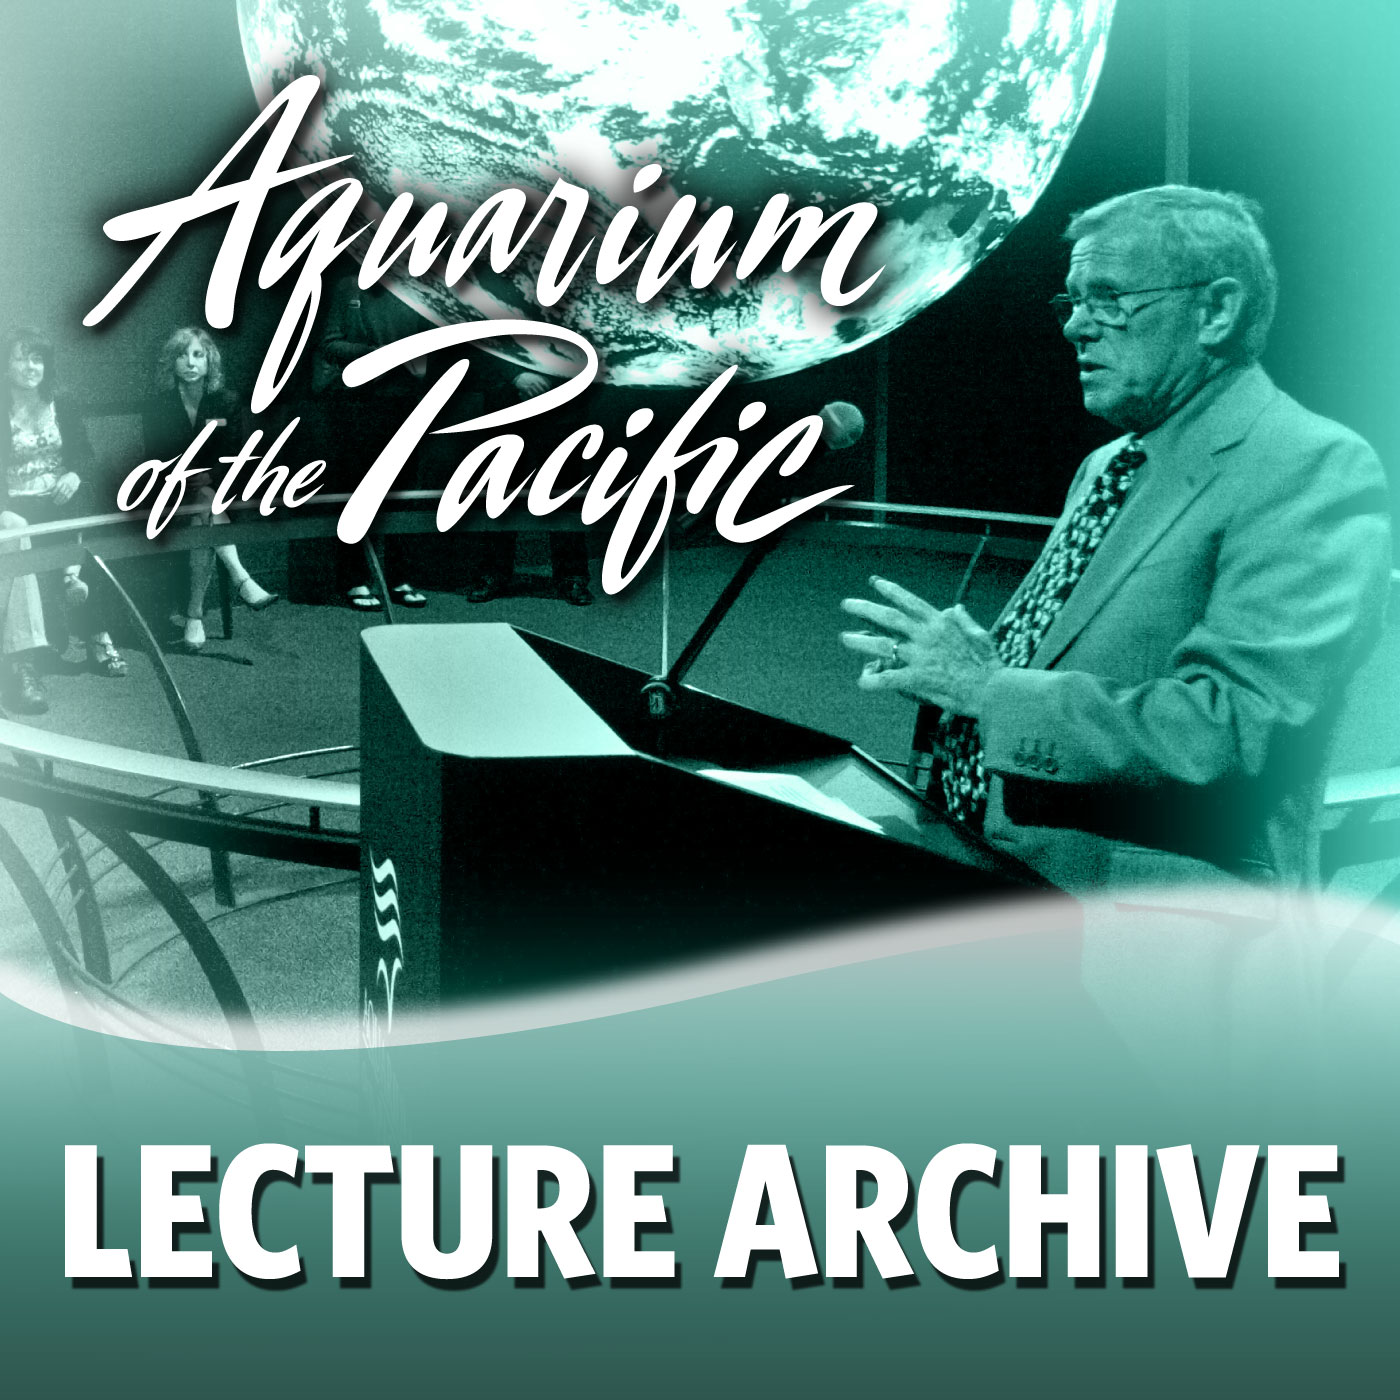 Lecture Archive 2015 Podcast artwork